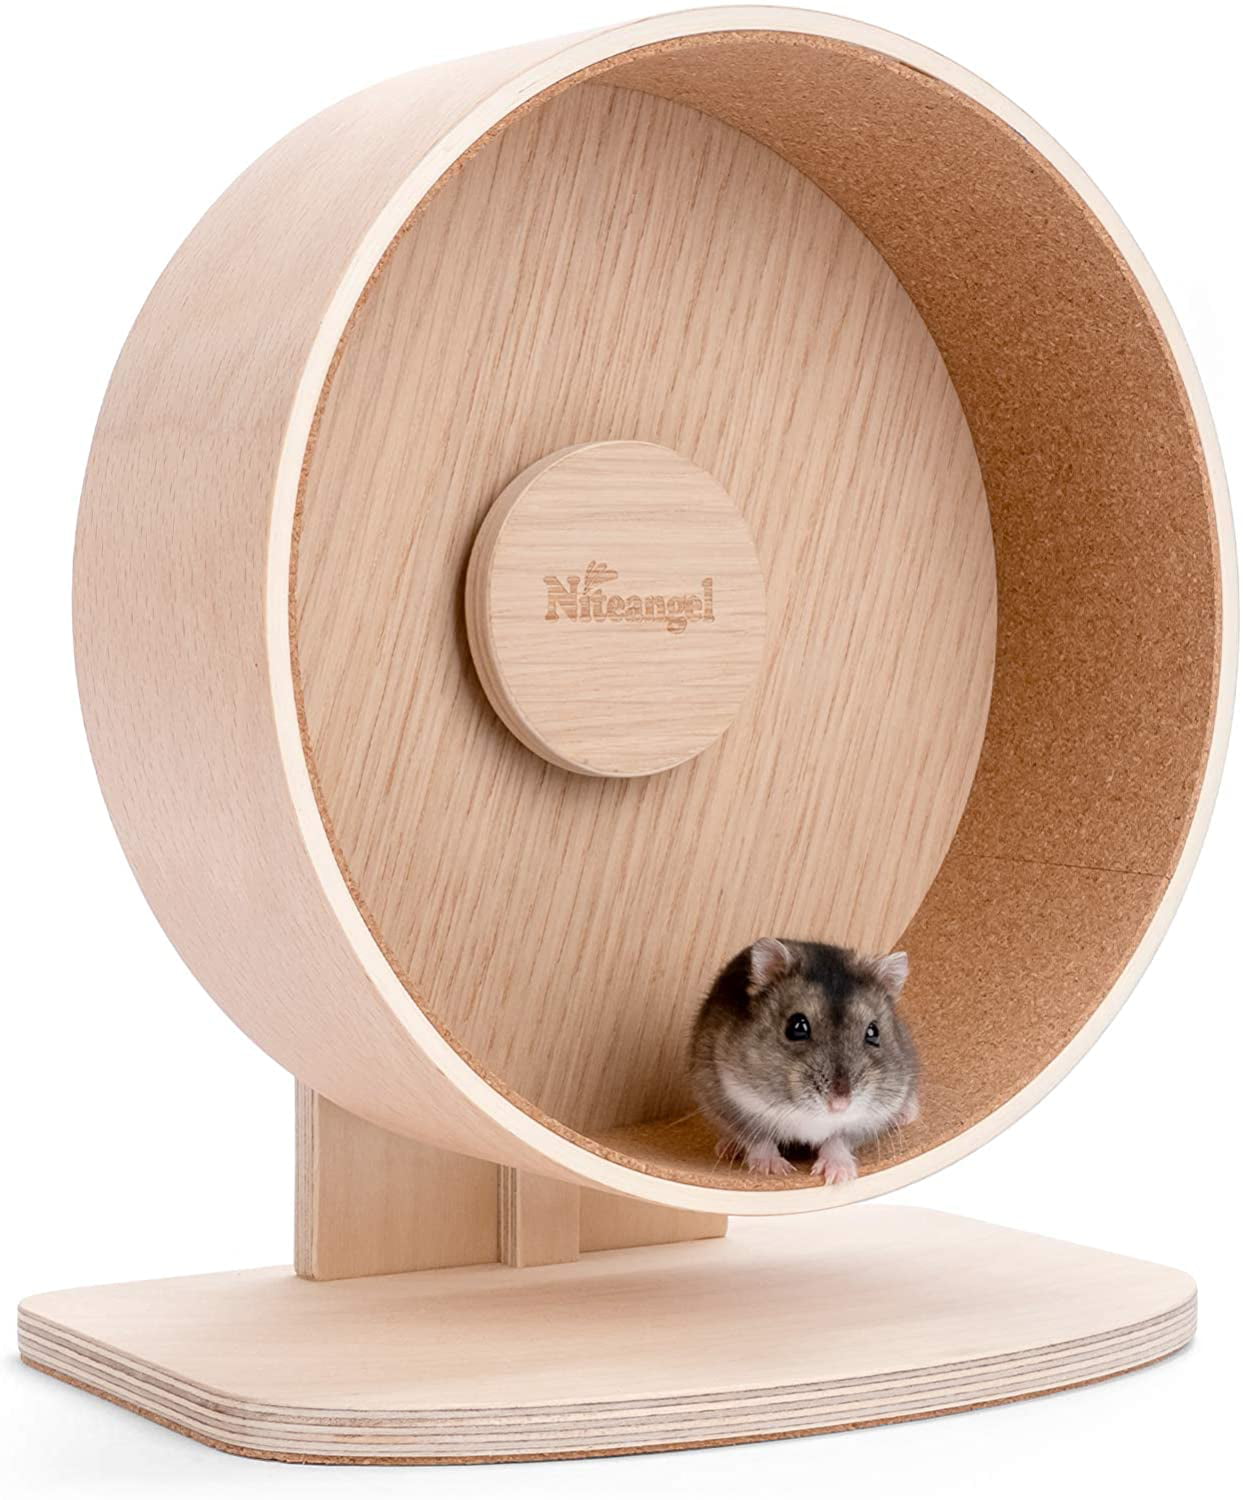 Hamster Exercise Wheel,Wooden Quiet Hamster Round Wheel Exercise Sports Roller